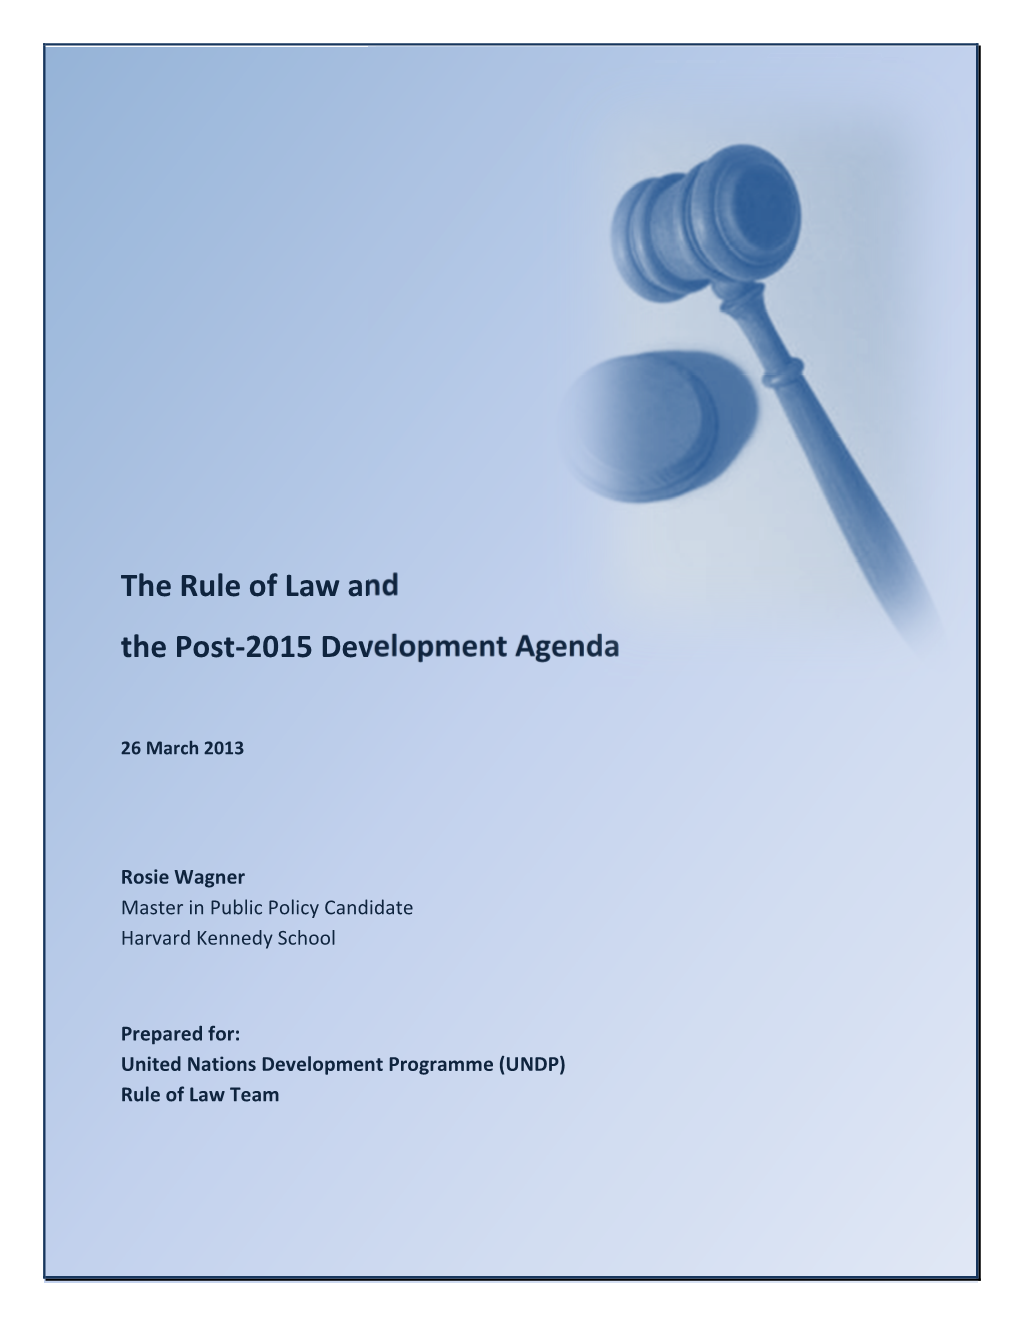 The Rule of Law and the Post-2015 Development Agenda